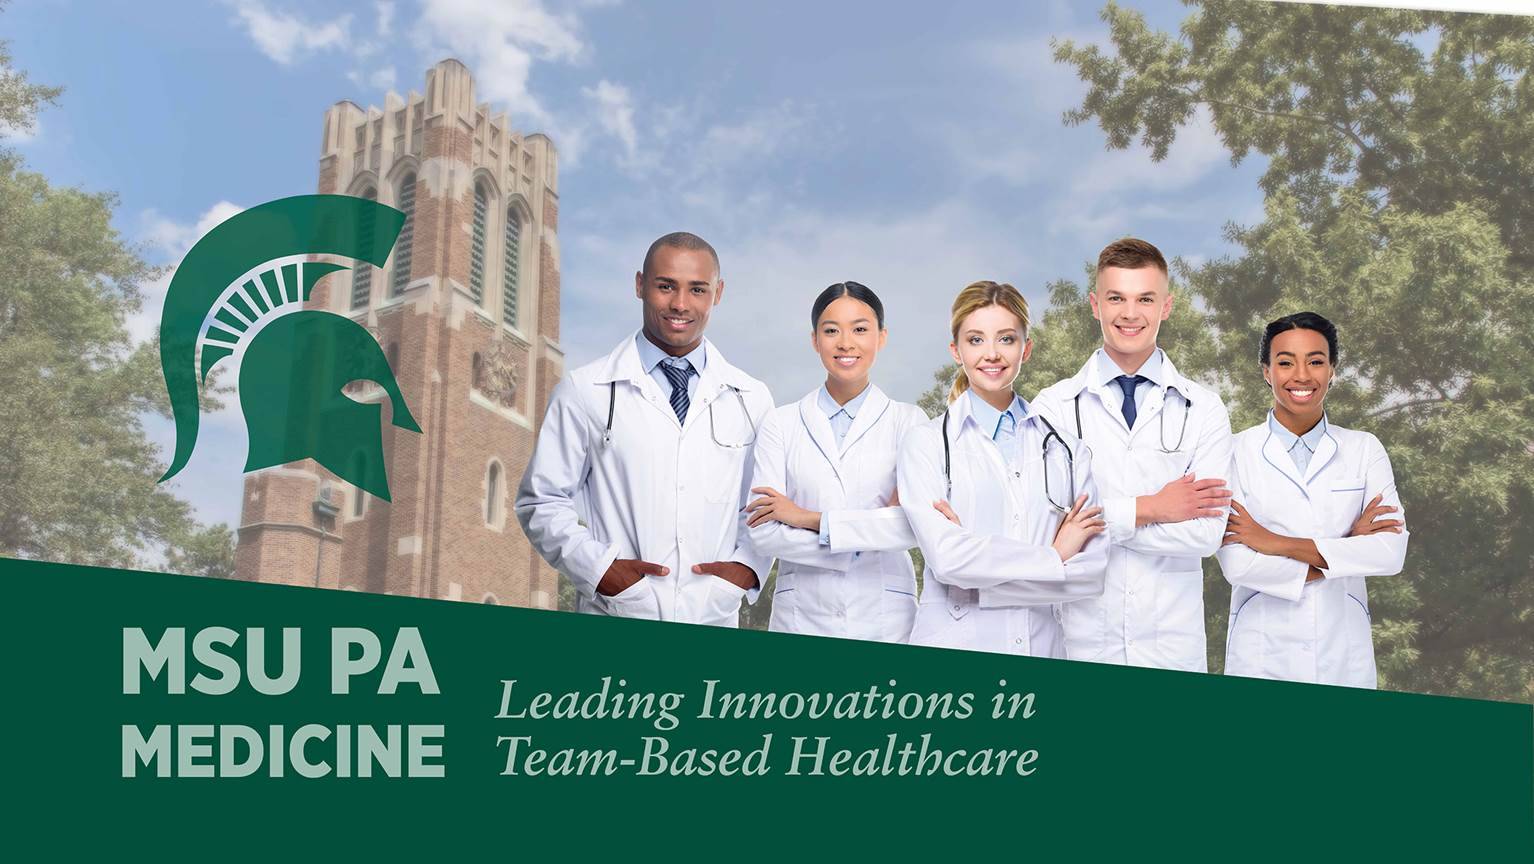 MSU PA Medicine image of students in white coats